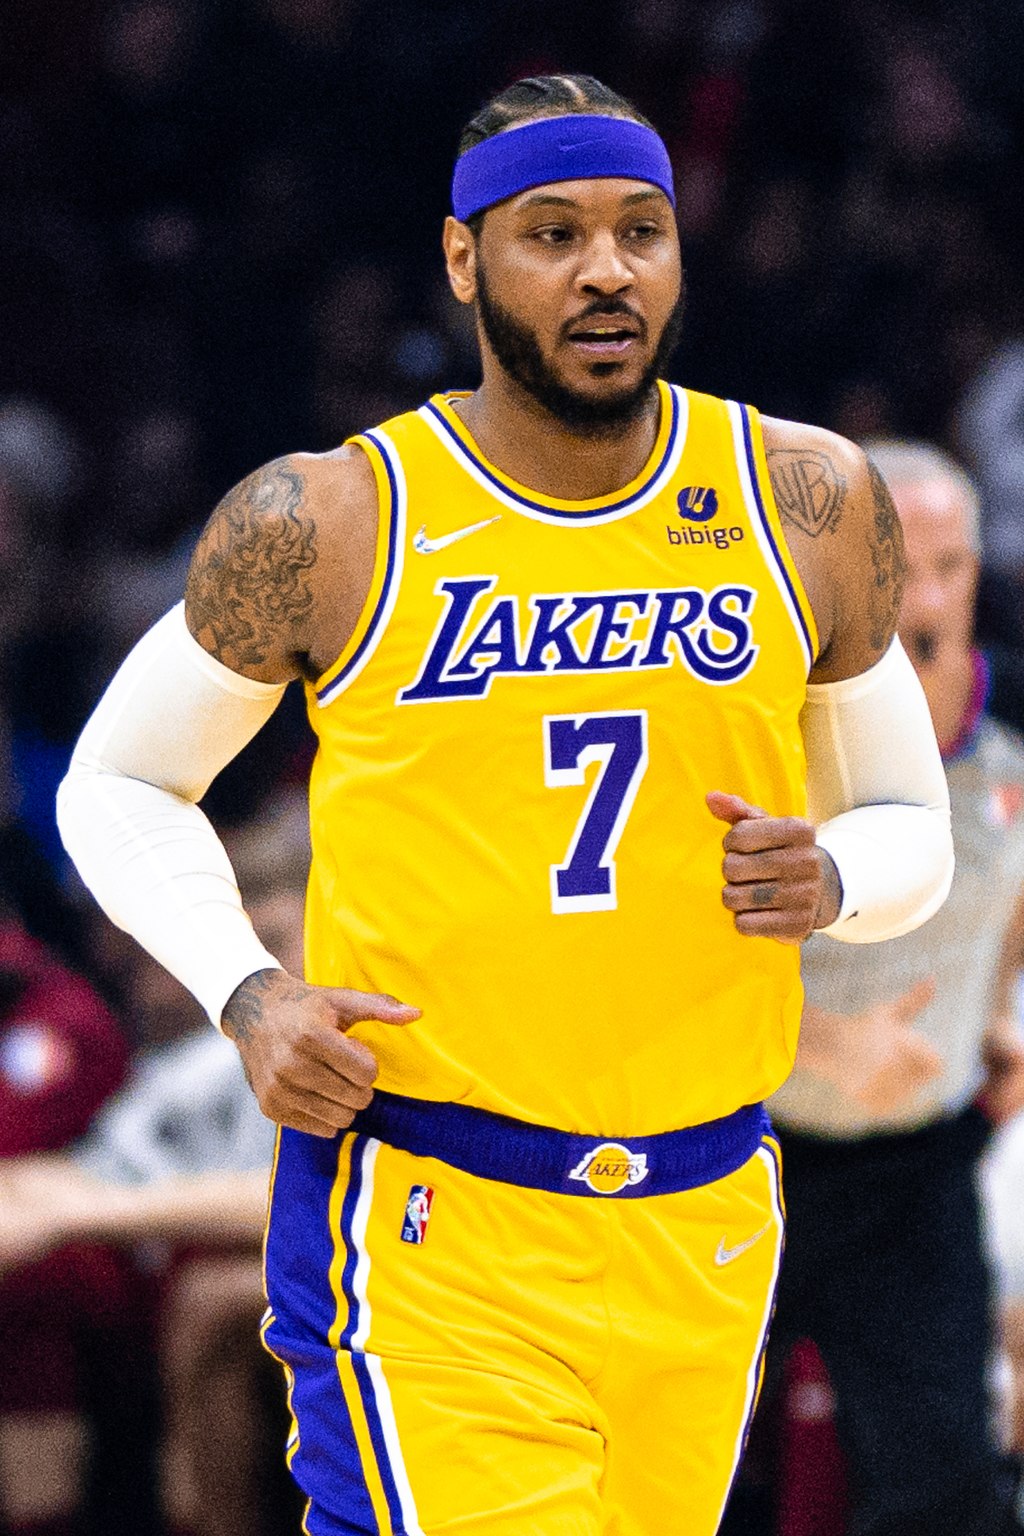 Carmelo Anthony hits milestone in Lakers' win over Grizzlies - Los